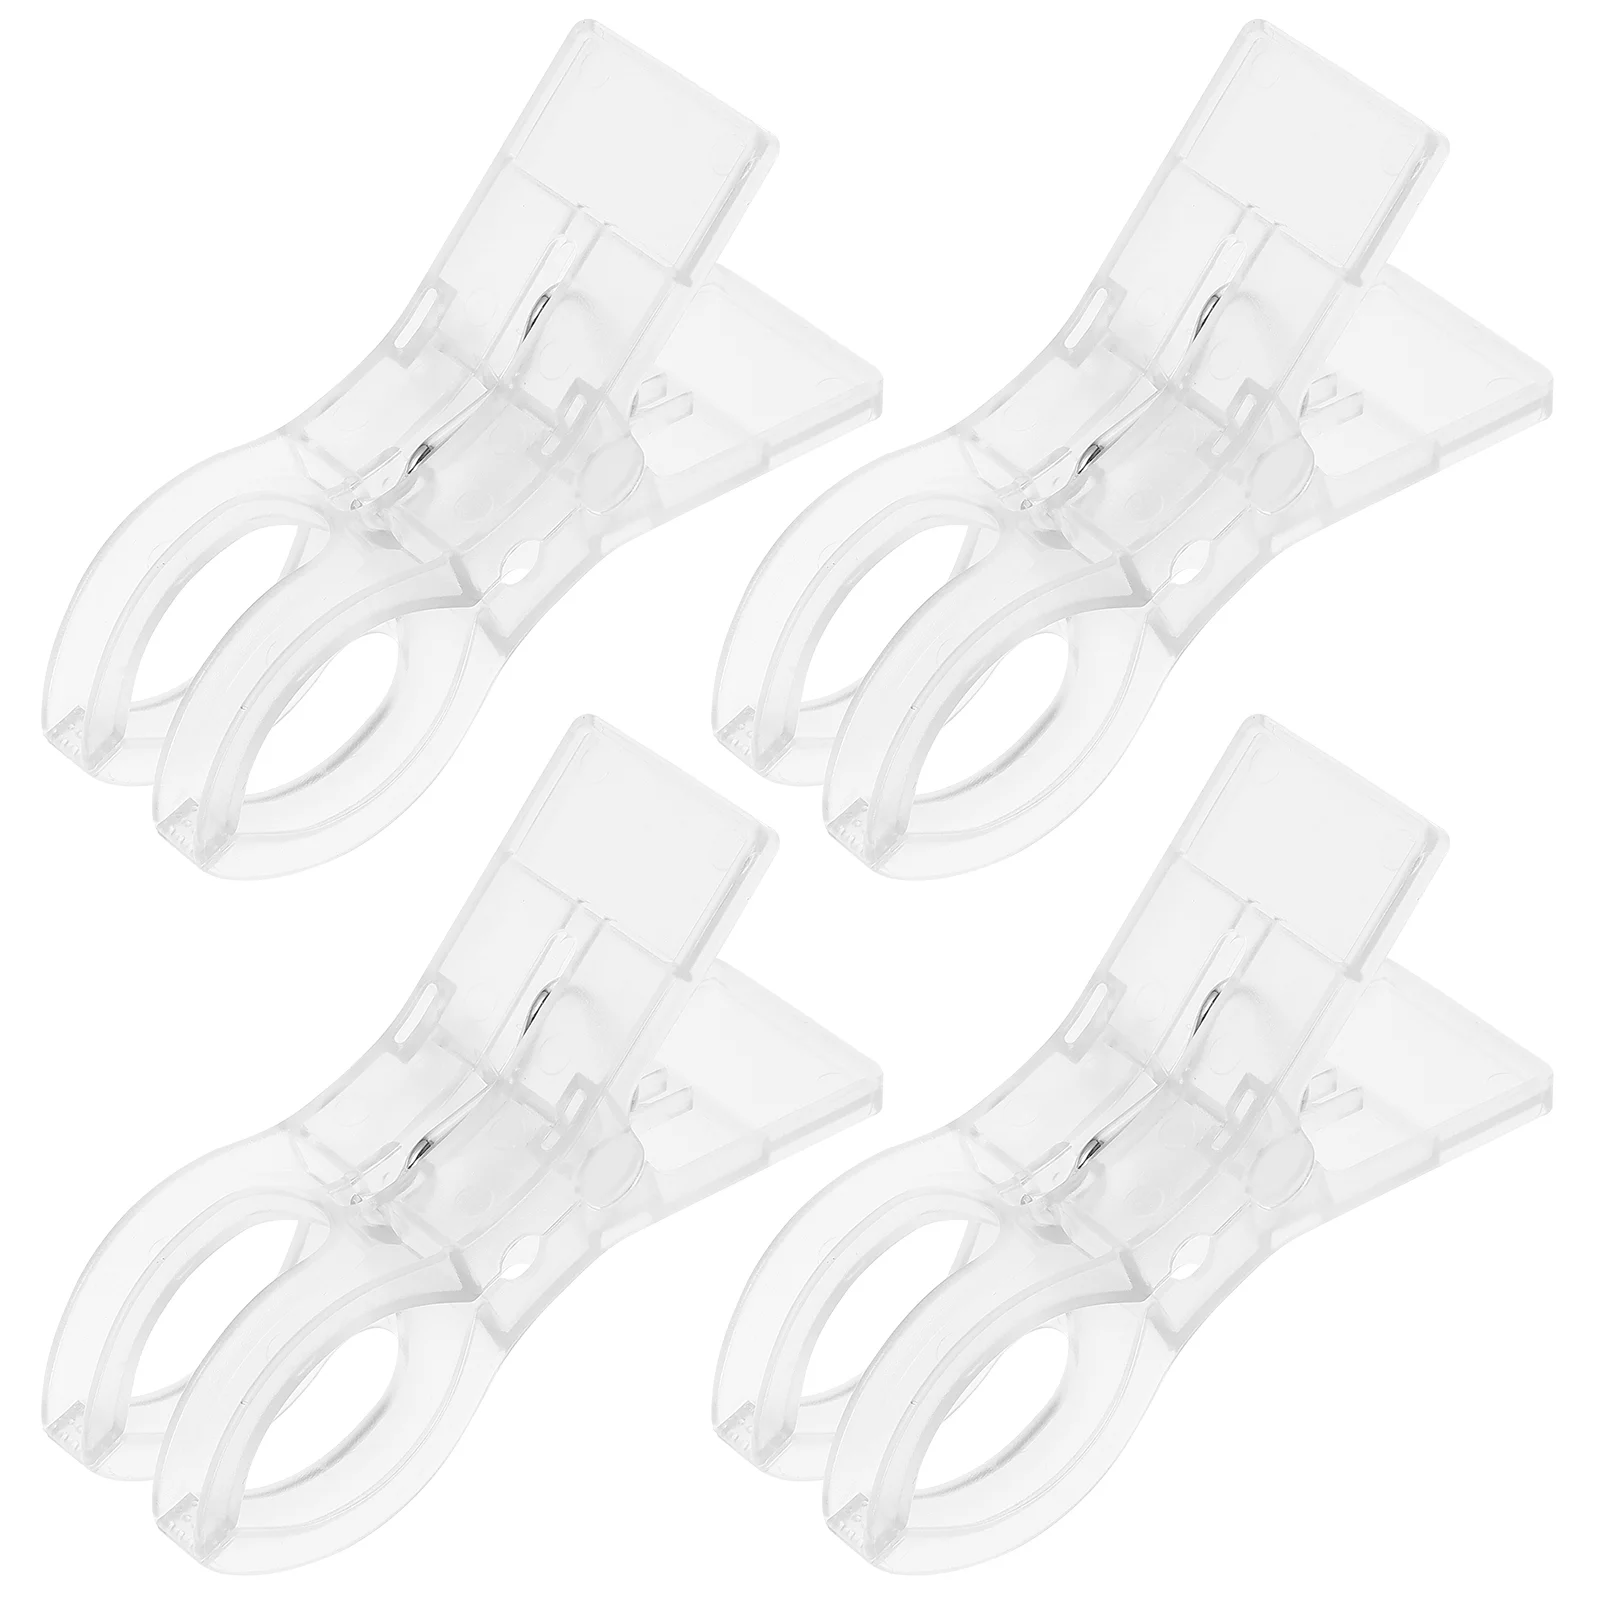 

4 Pcs Clip Hangers Blankets Clamps Windproof Clothespins Windbreaker Plastic Quilt Clips Abs Laundry